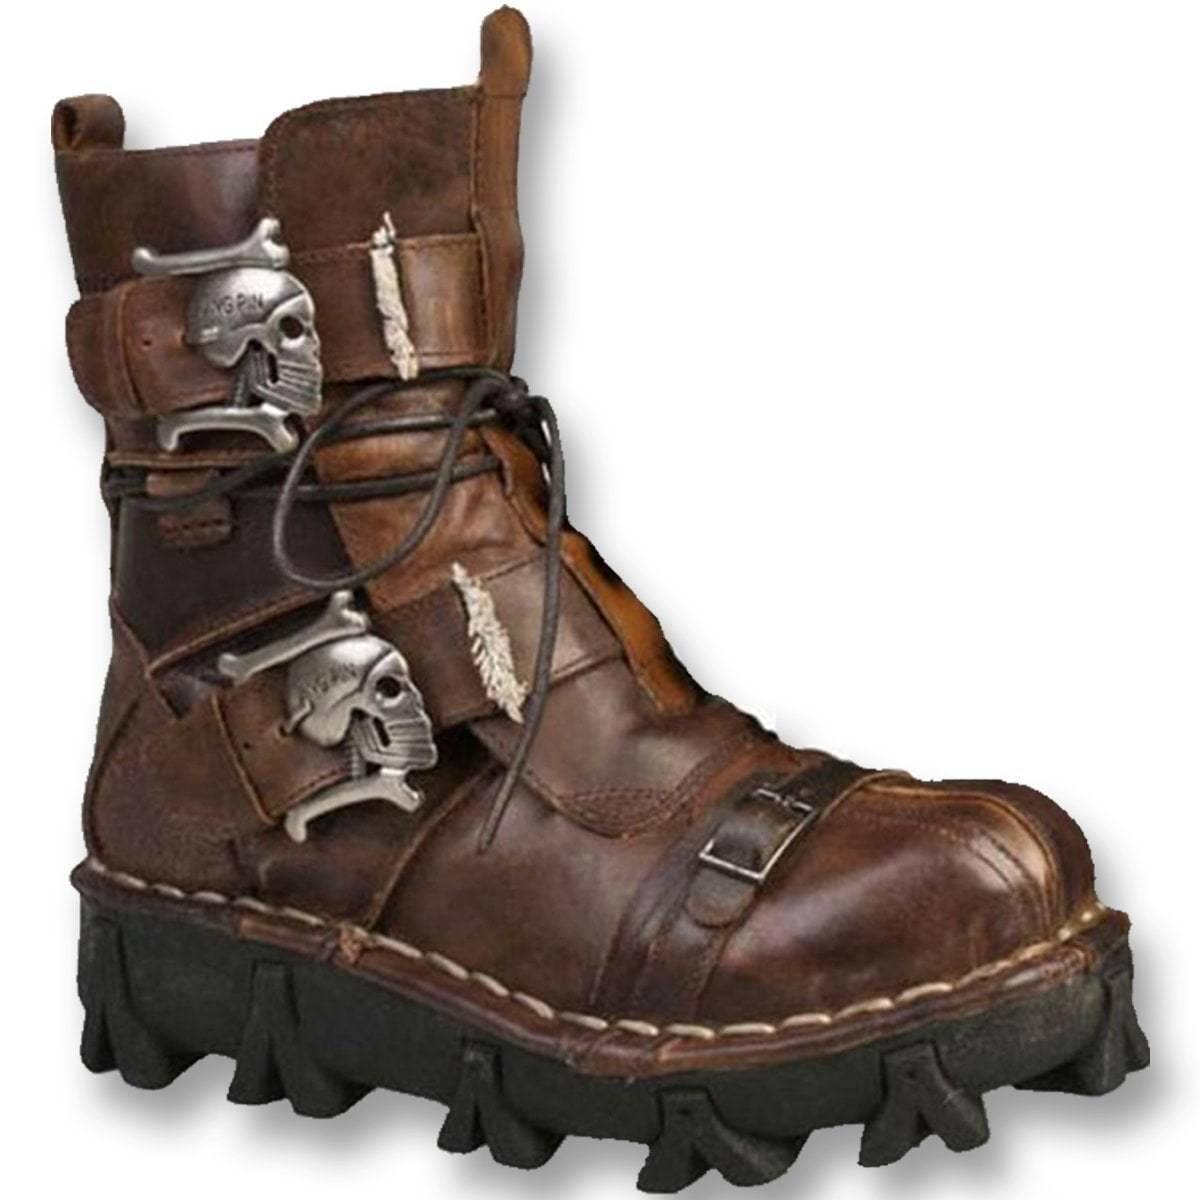 A pair of Handmade Leather Skull Boots with metal buckles.